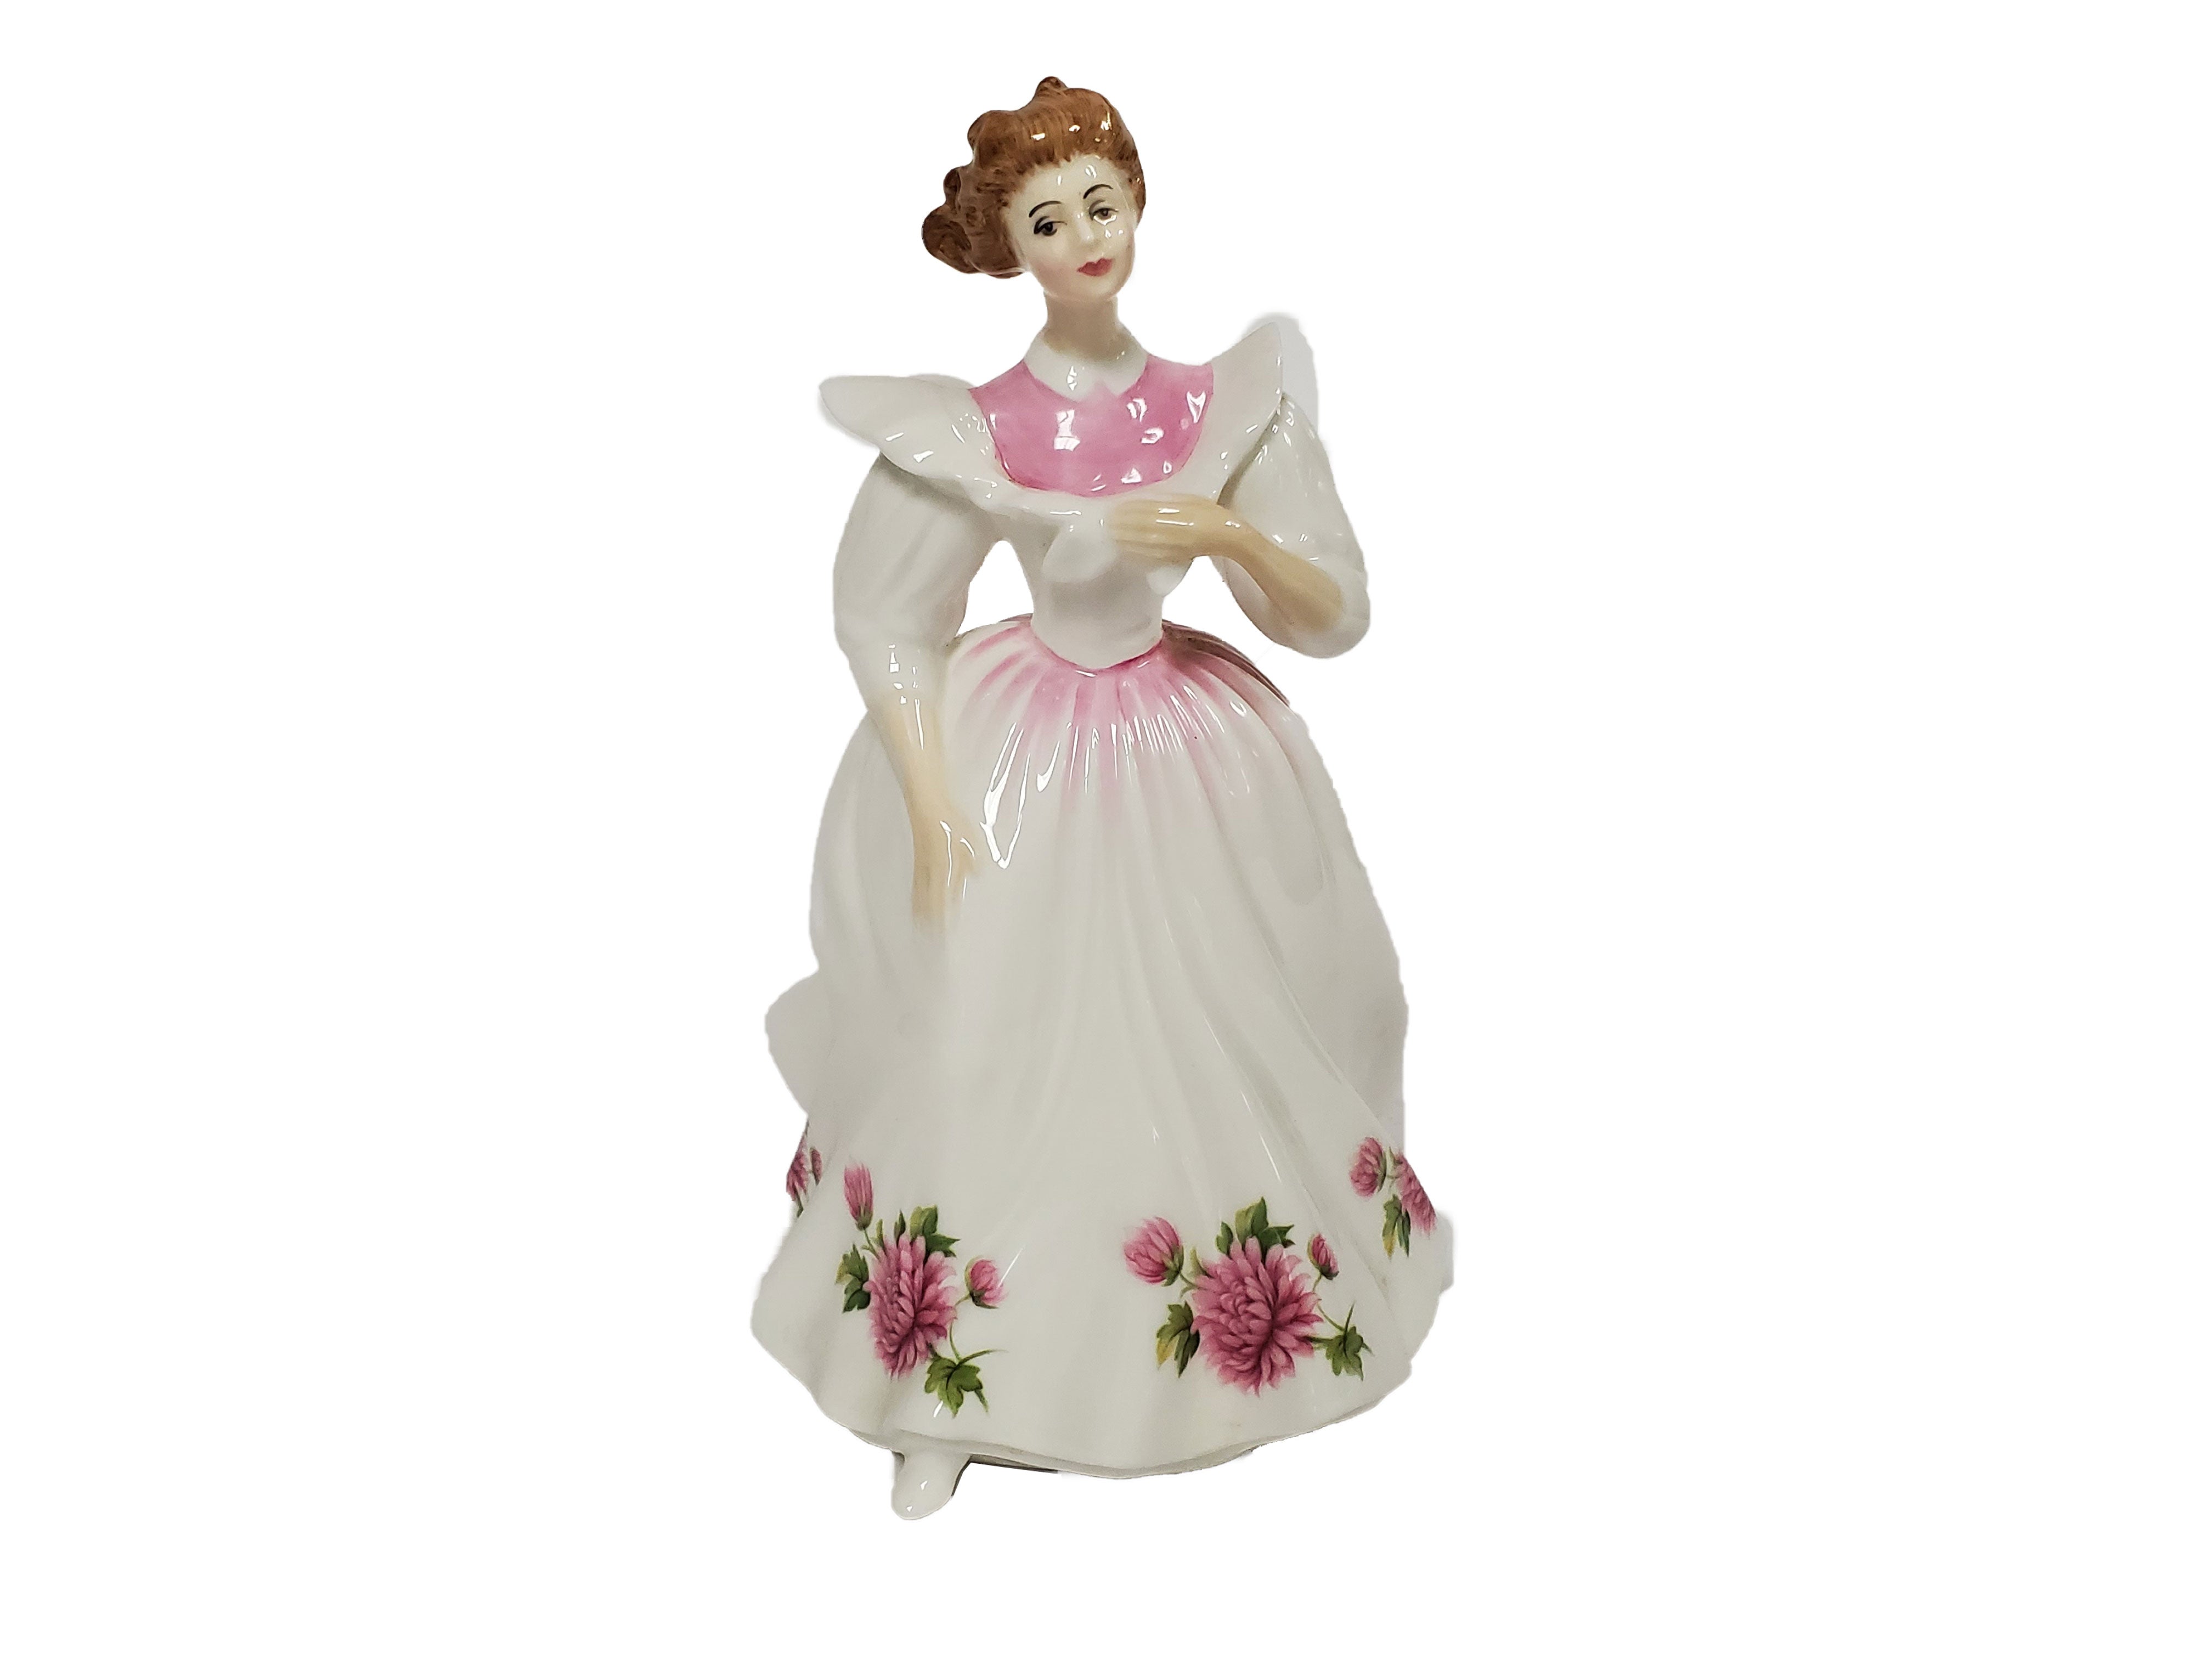 Royal Doulton November Figurine of the Month collection HN2695 - Royal Gift